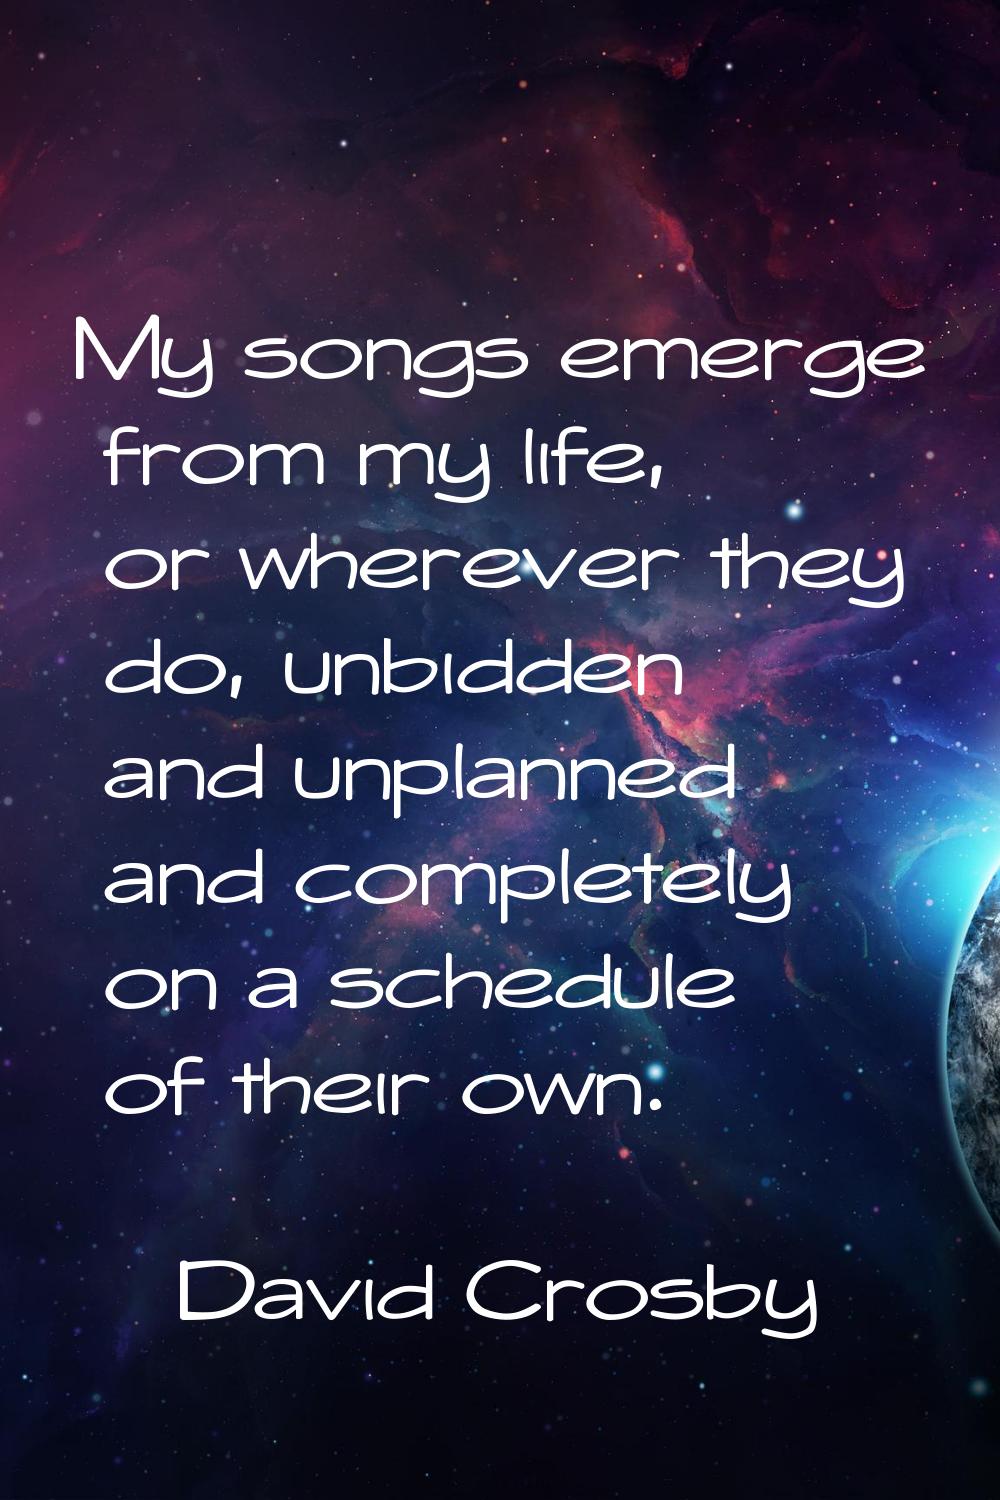 My songs emerge from my life, or wherever they do, unbidden and unplanned and completely on a sched